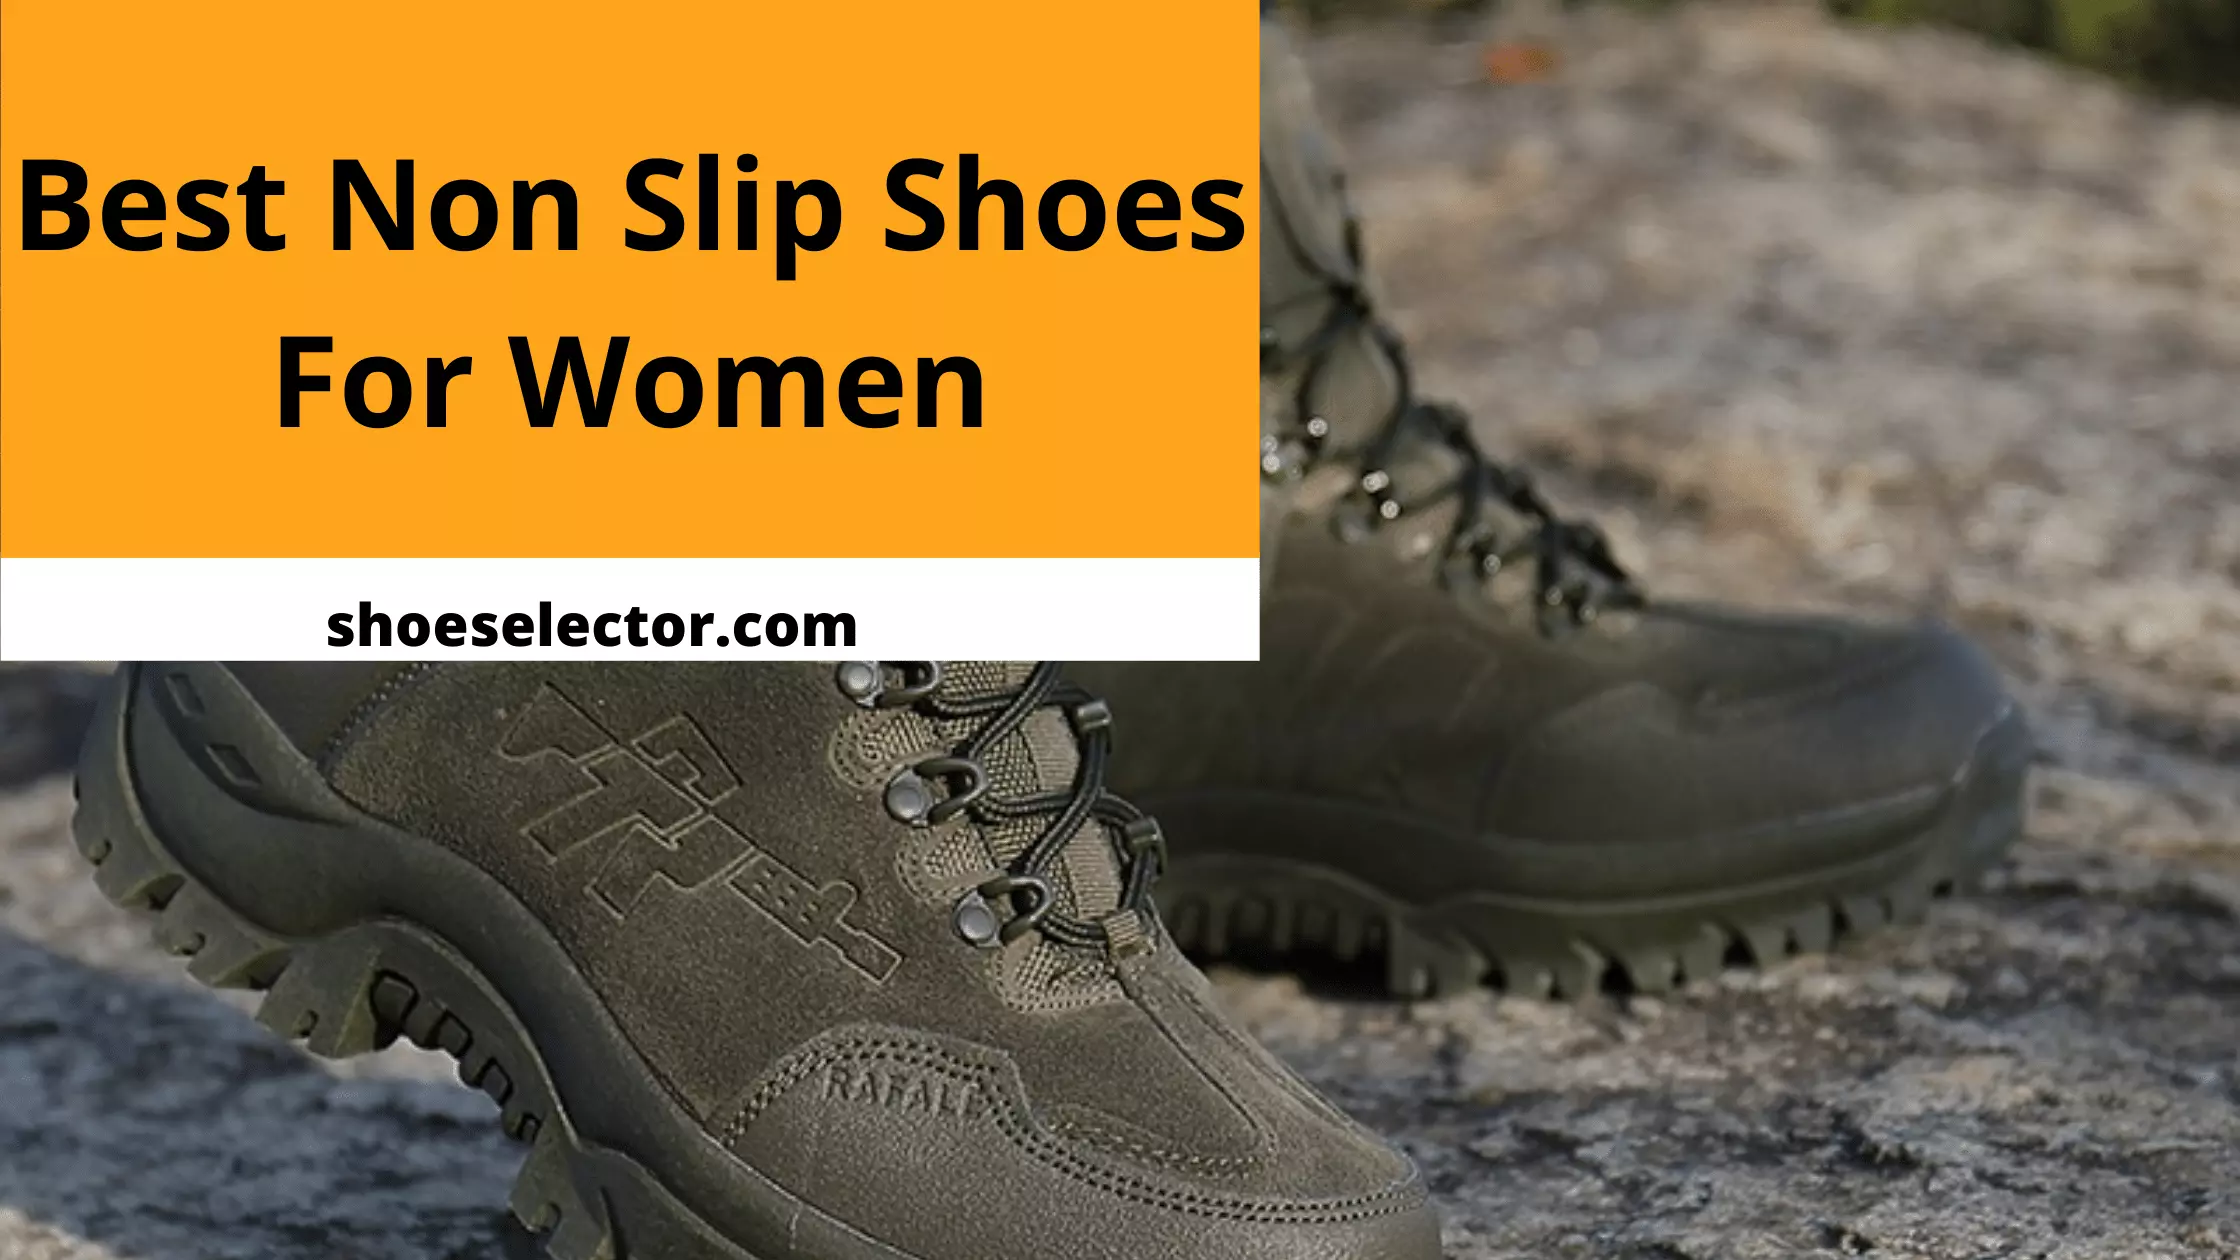 Best Non Slip Shoes For Women - Recommended Guide